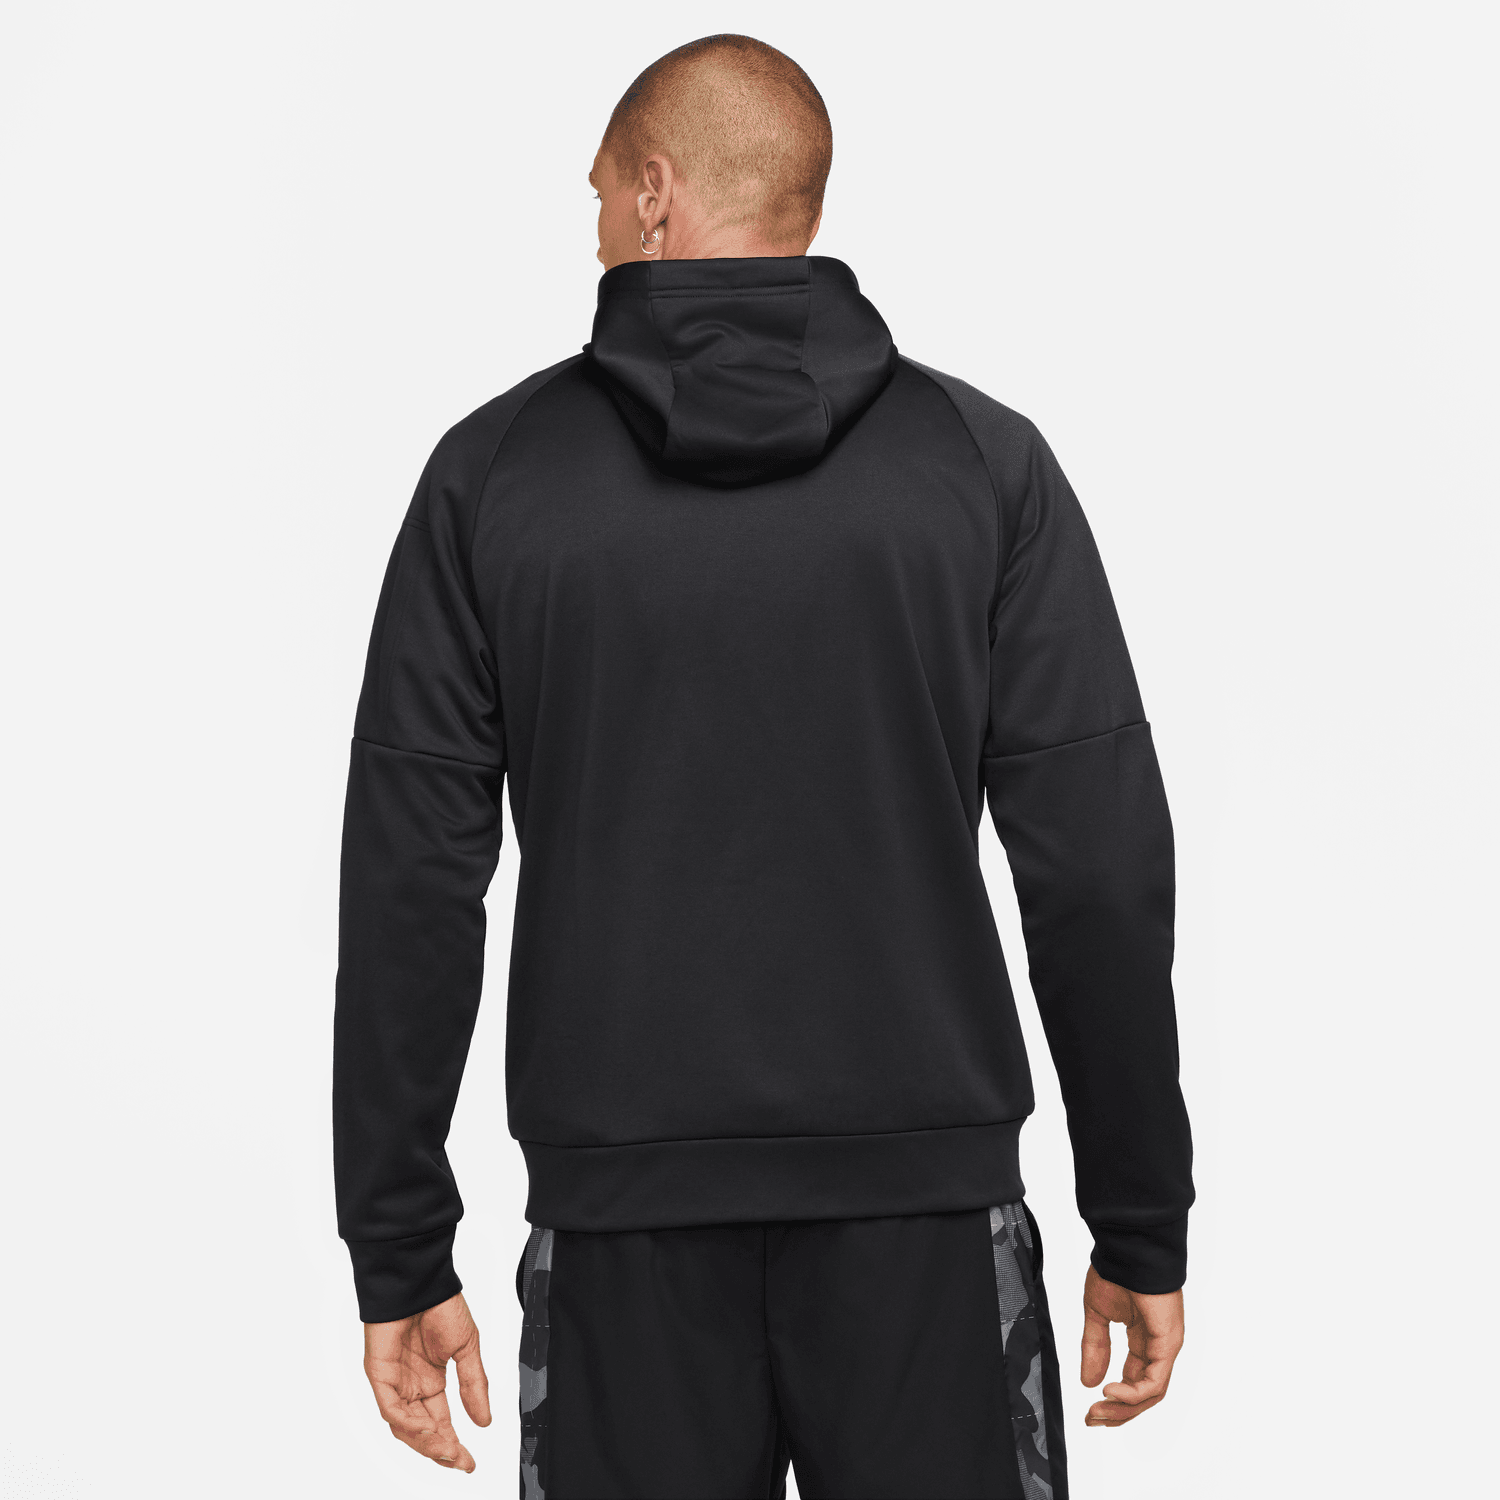 Nike Golf Men's Therma-FIT Full-Zip Hooded Fitness Top DQ4830   